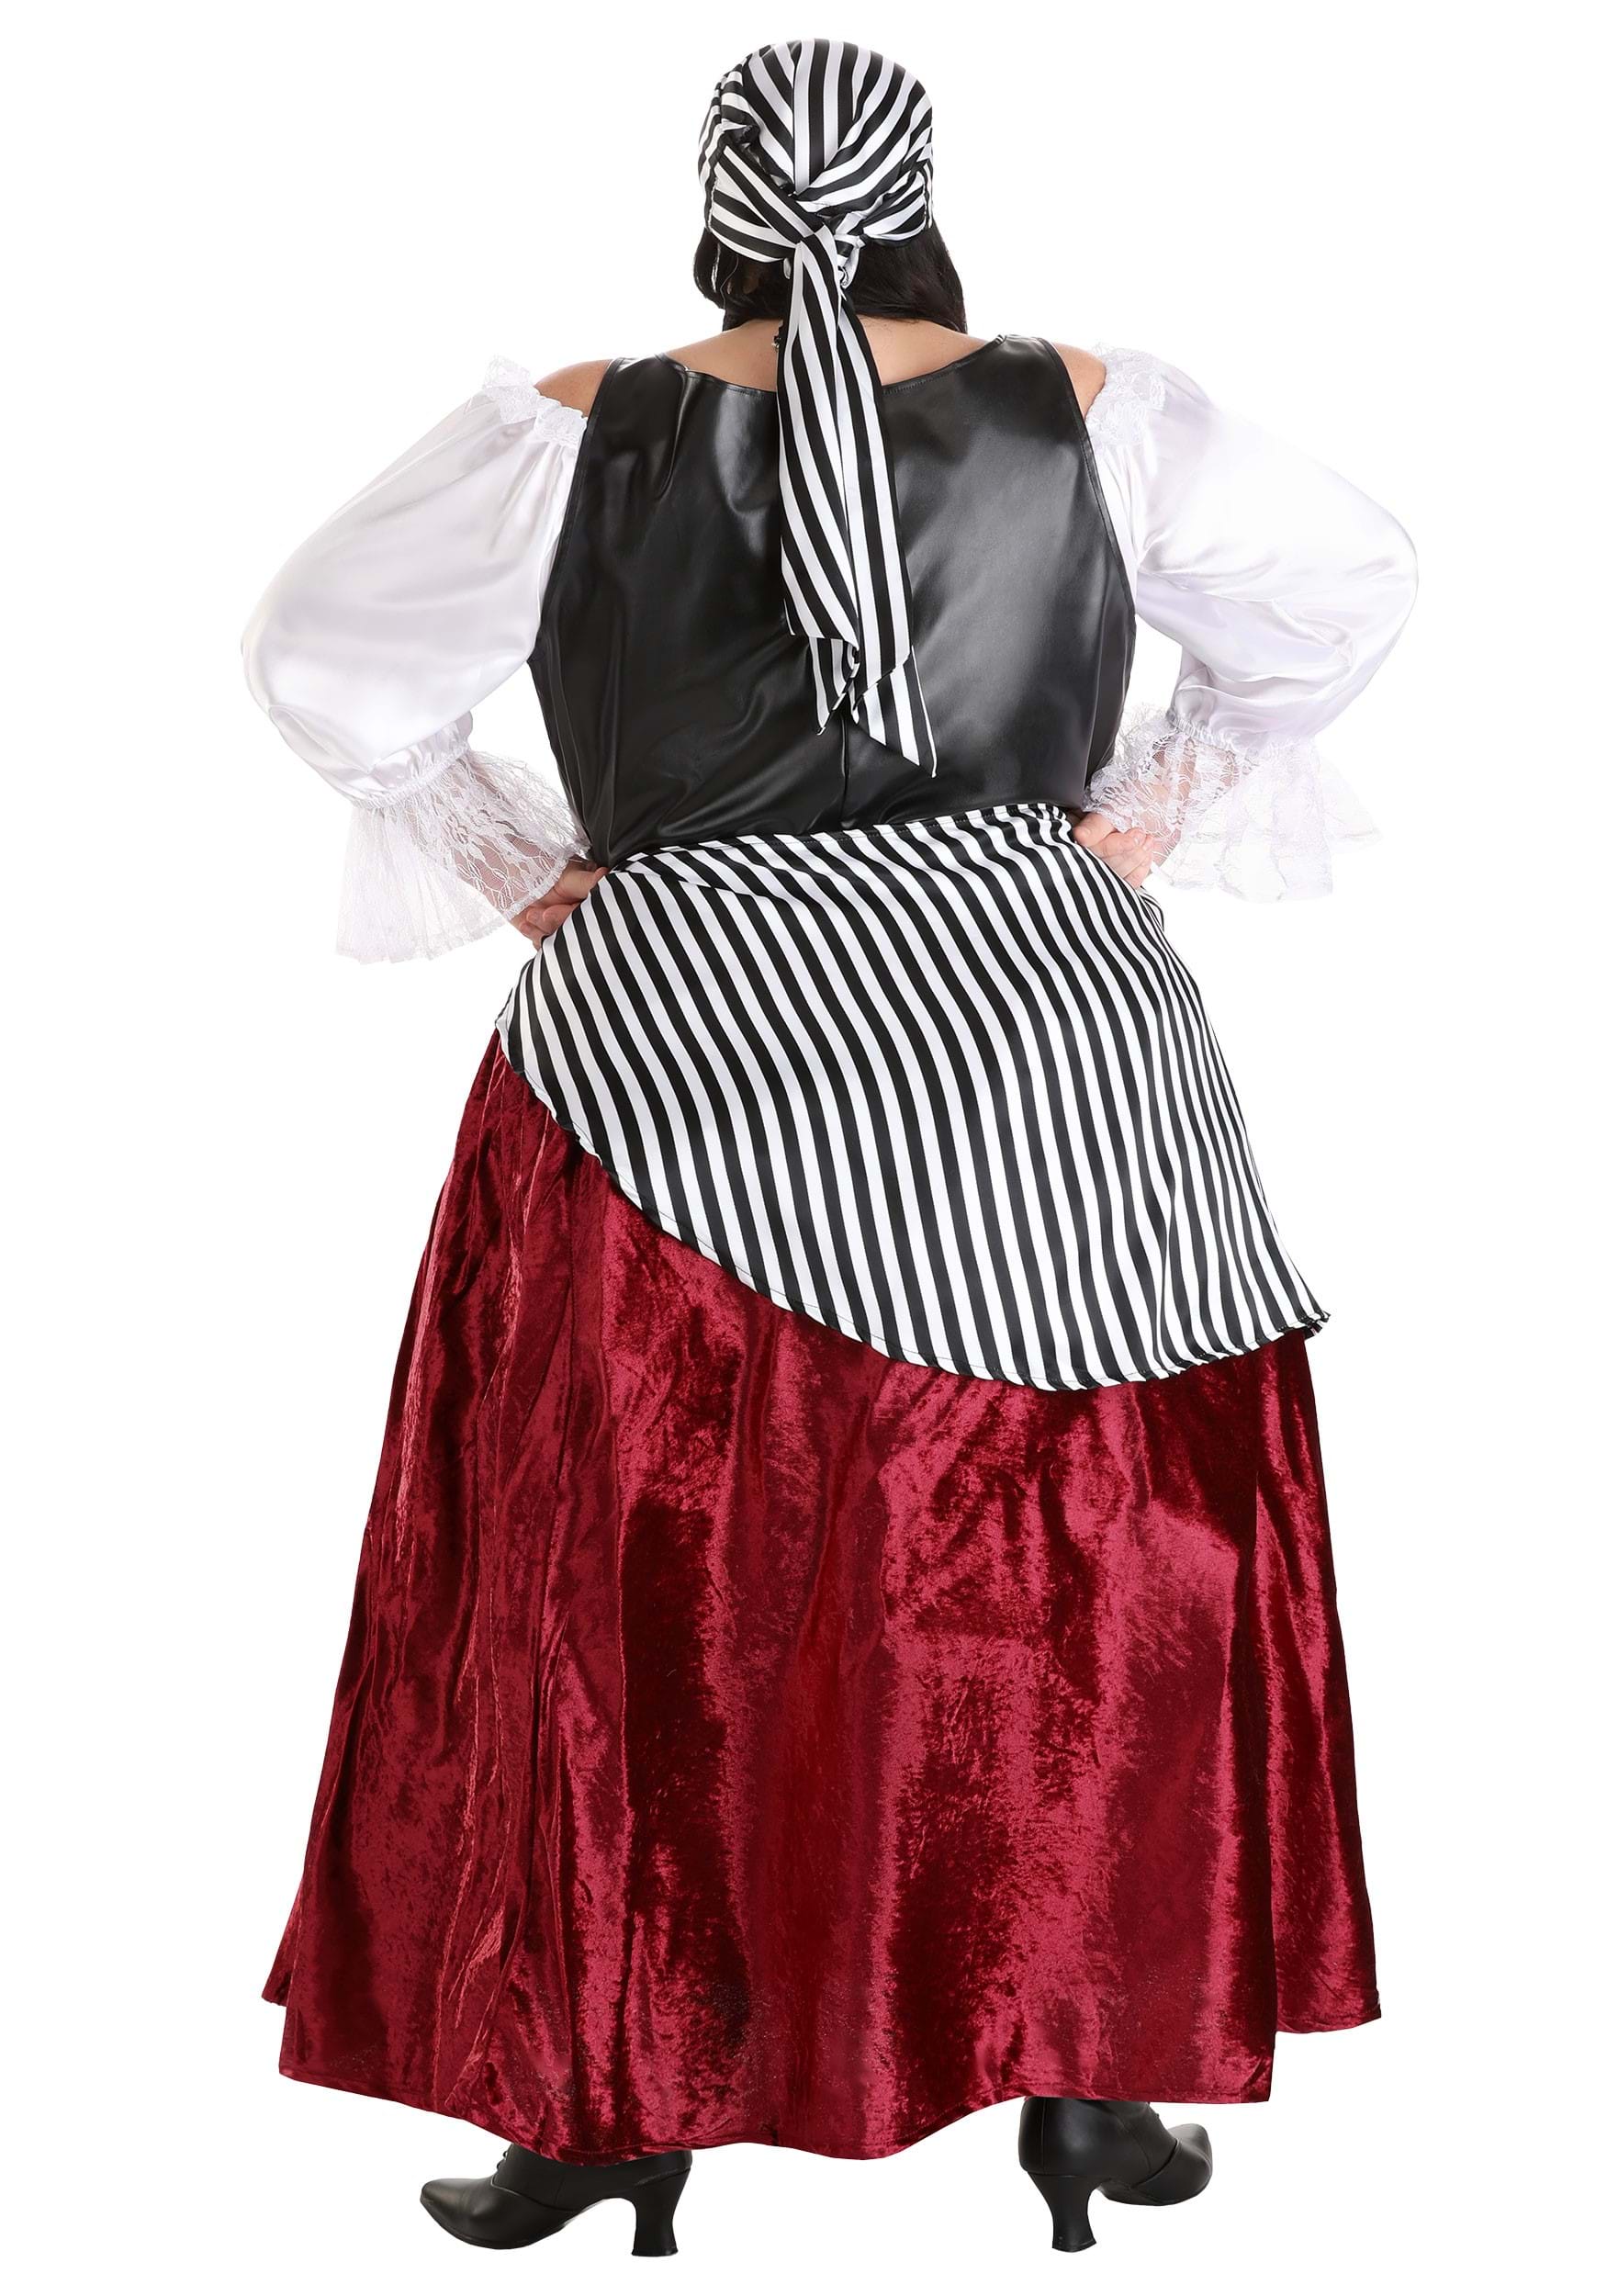 Plus Size Deluxe Pirate Wench Fancy Dress Costume , Pirate Dress